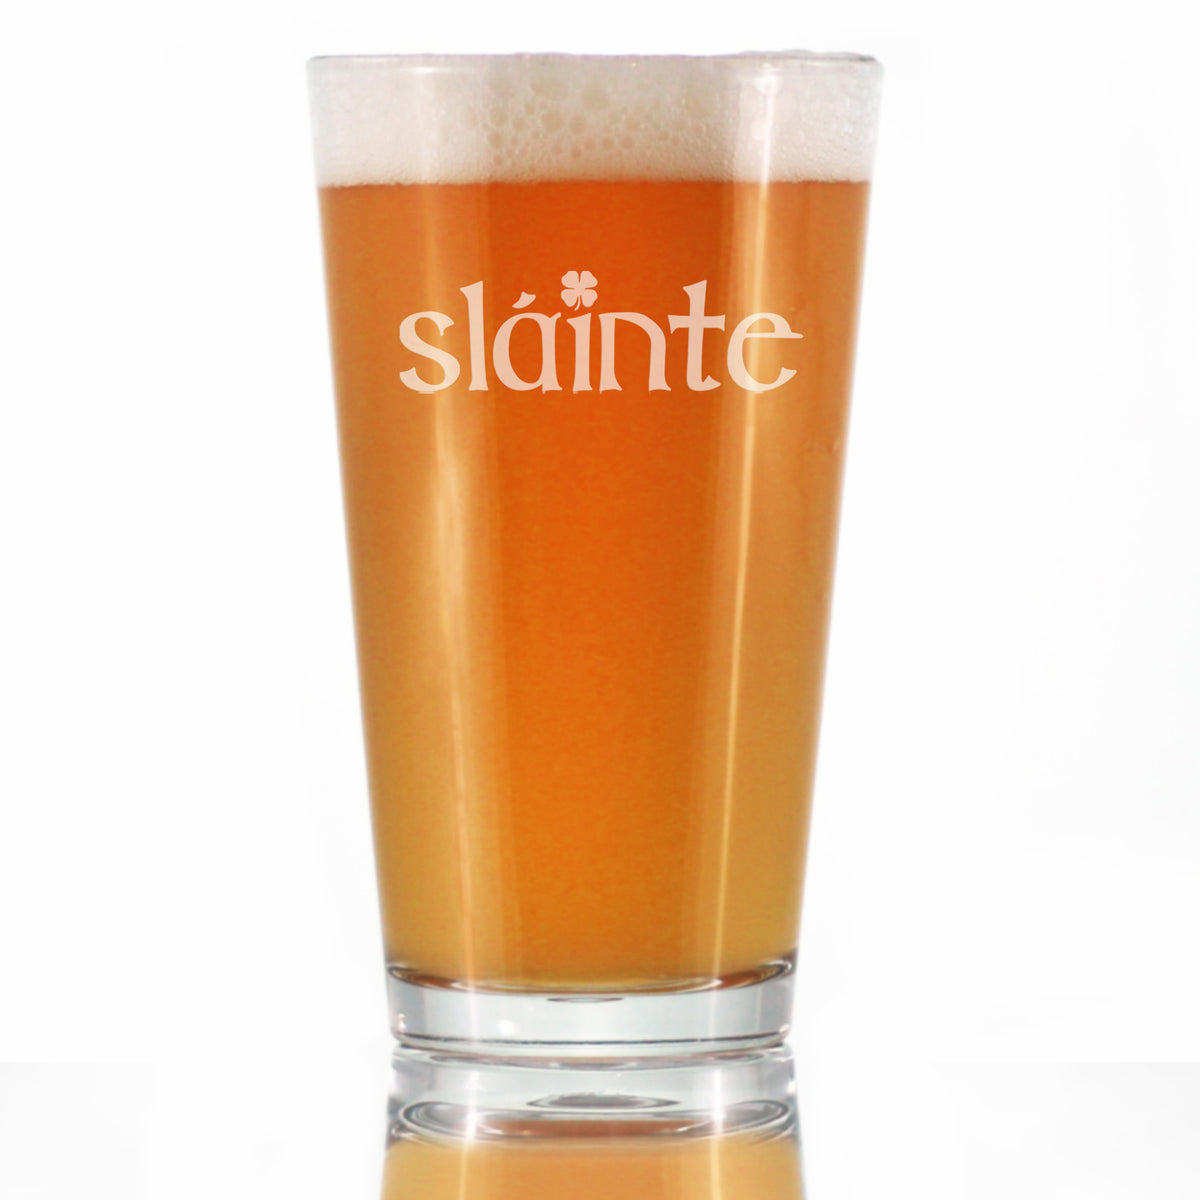 Slainte - Irish Cheers - Pint Glass for Beer - Funny St Patricks Day Party Decor or Gifts for Men &amp; Women - 16 oz Cup